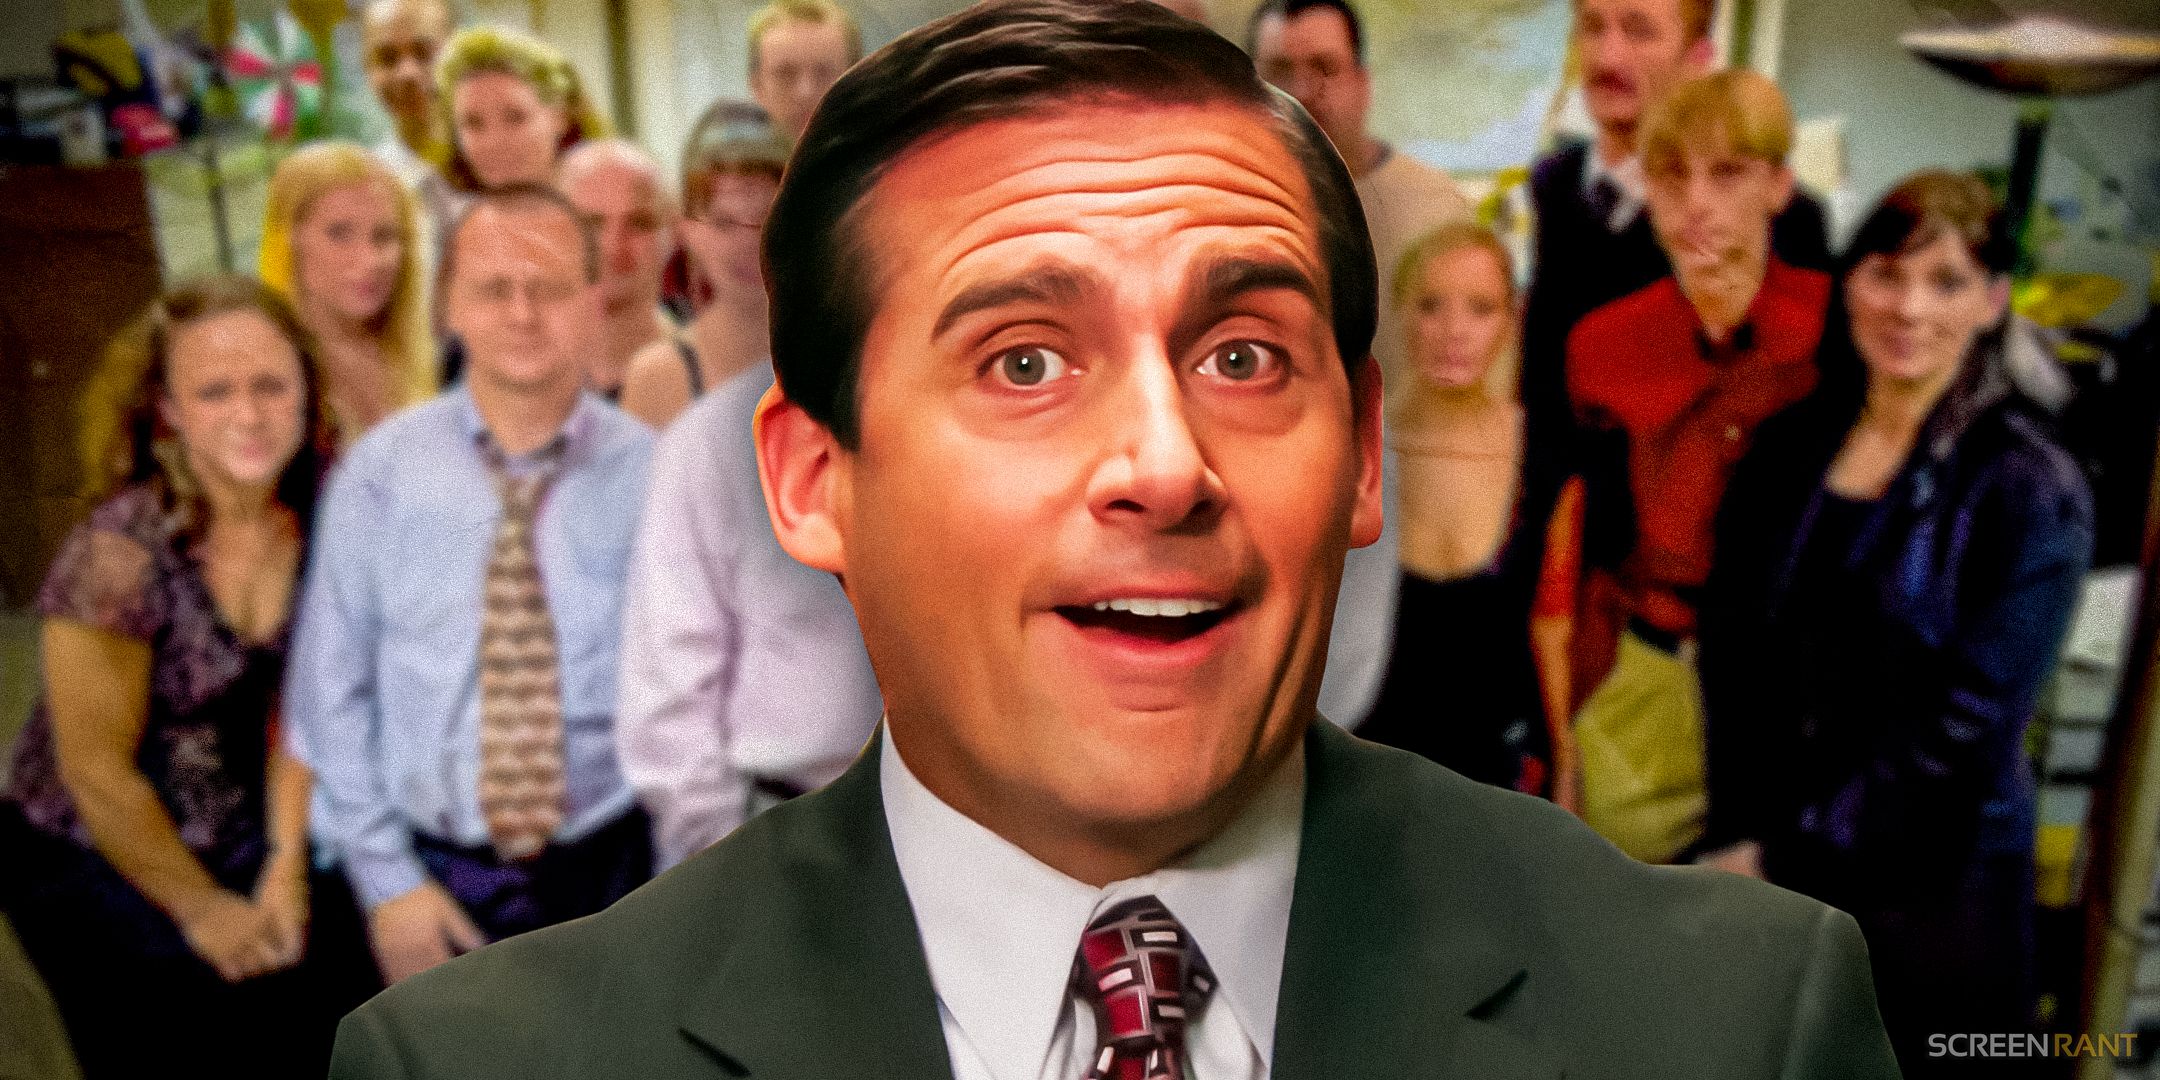 Steve Carell as Michael Scott from The Office in front of UK cast